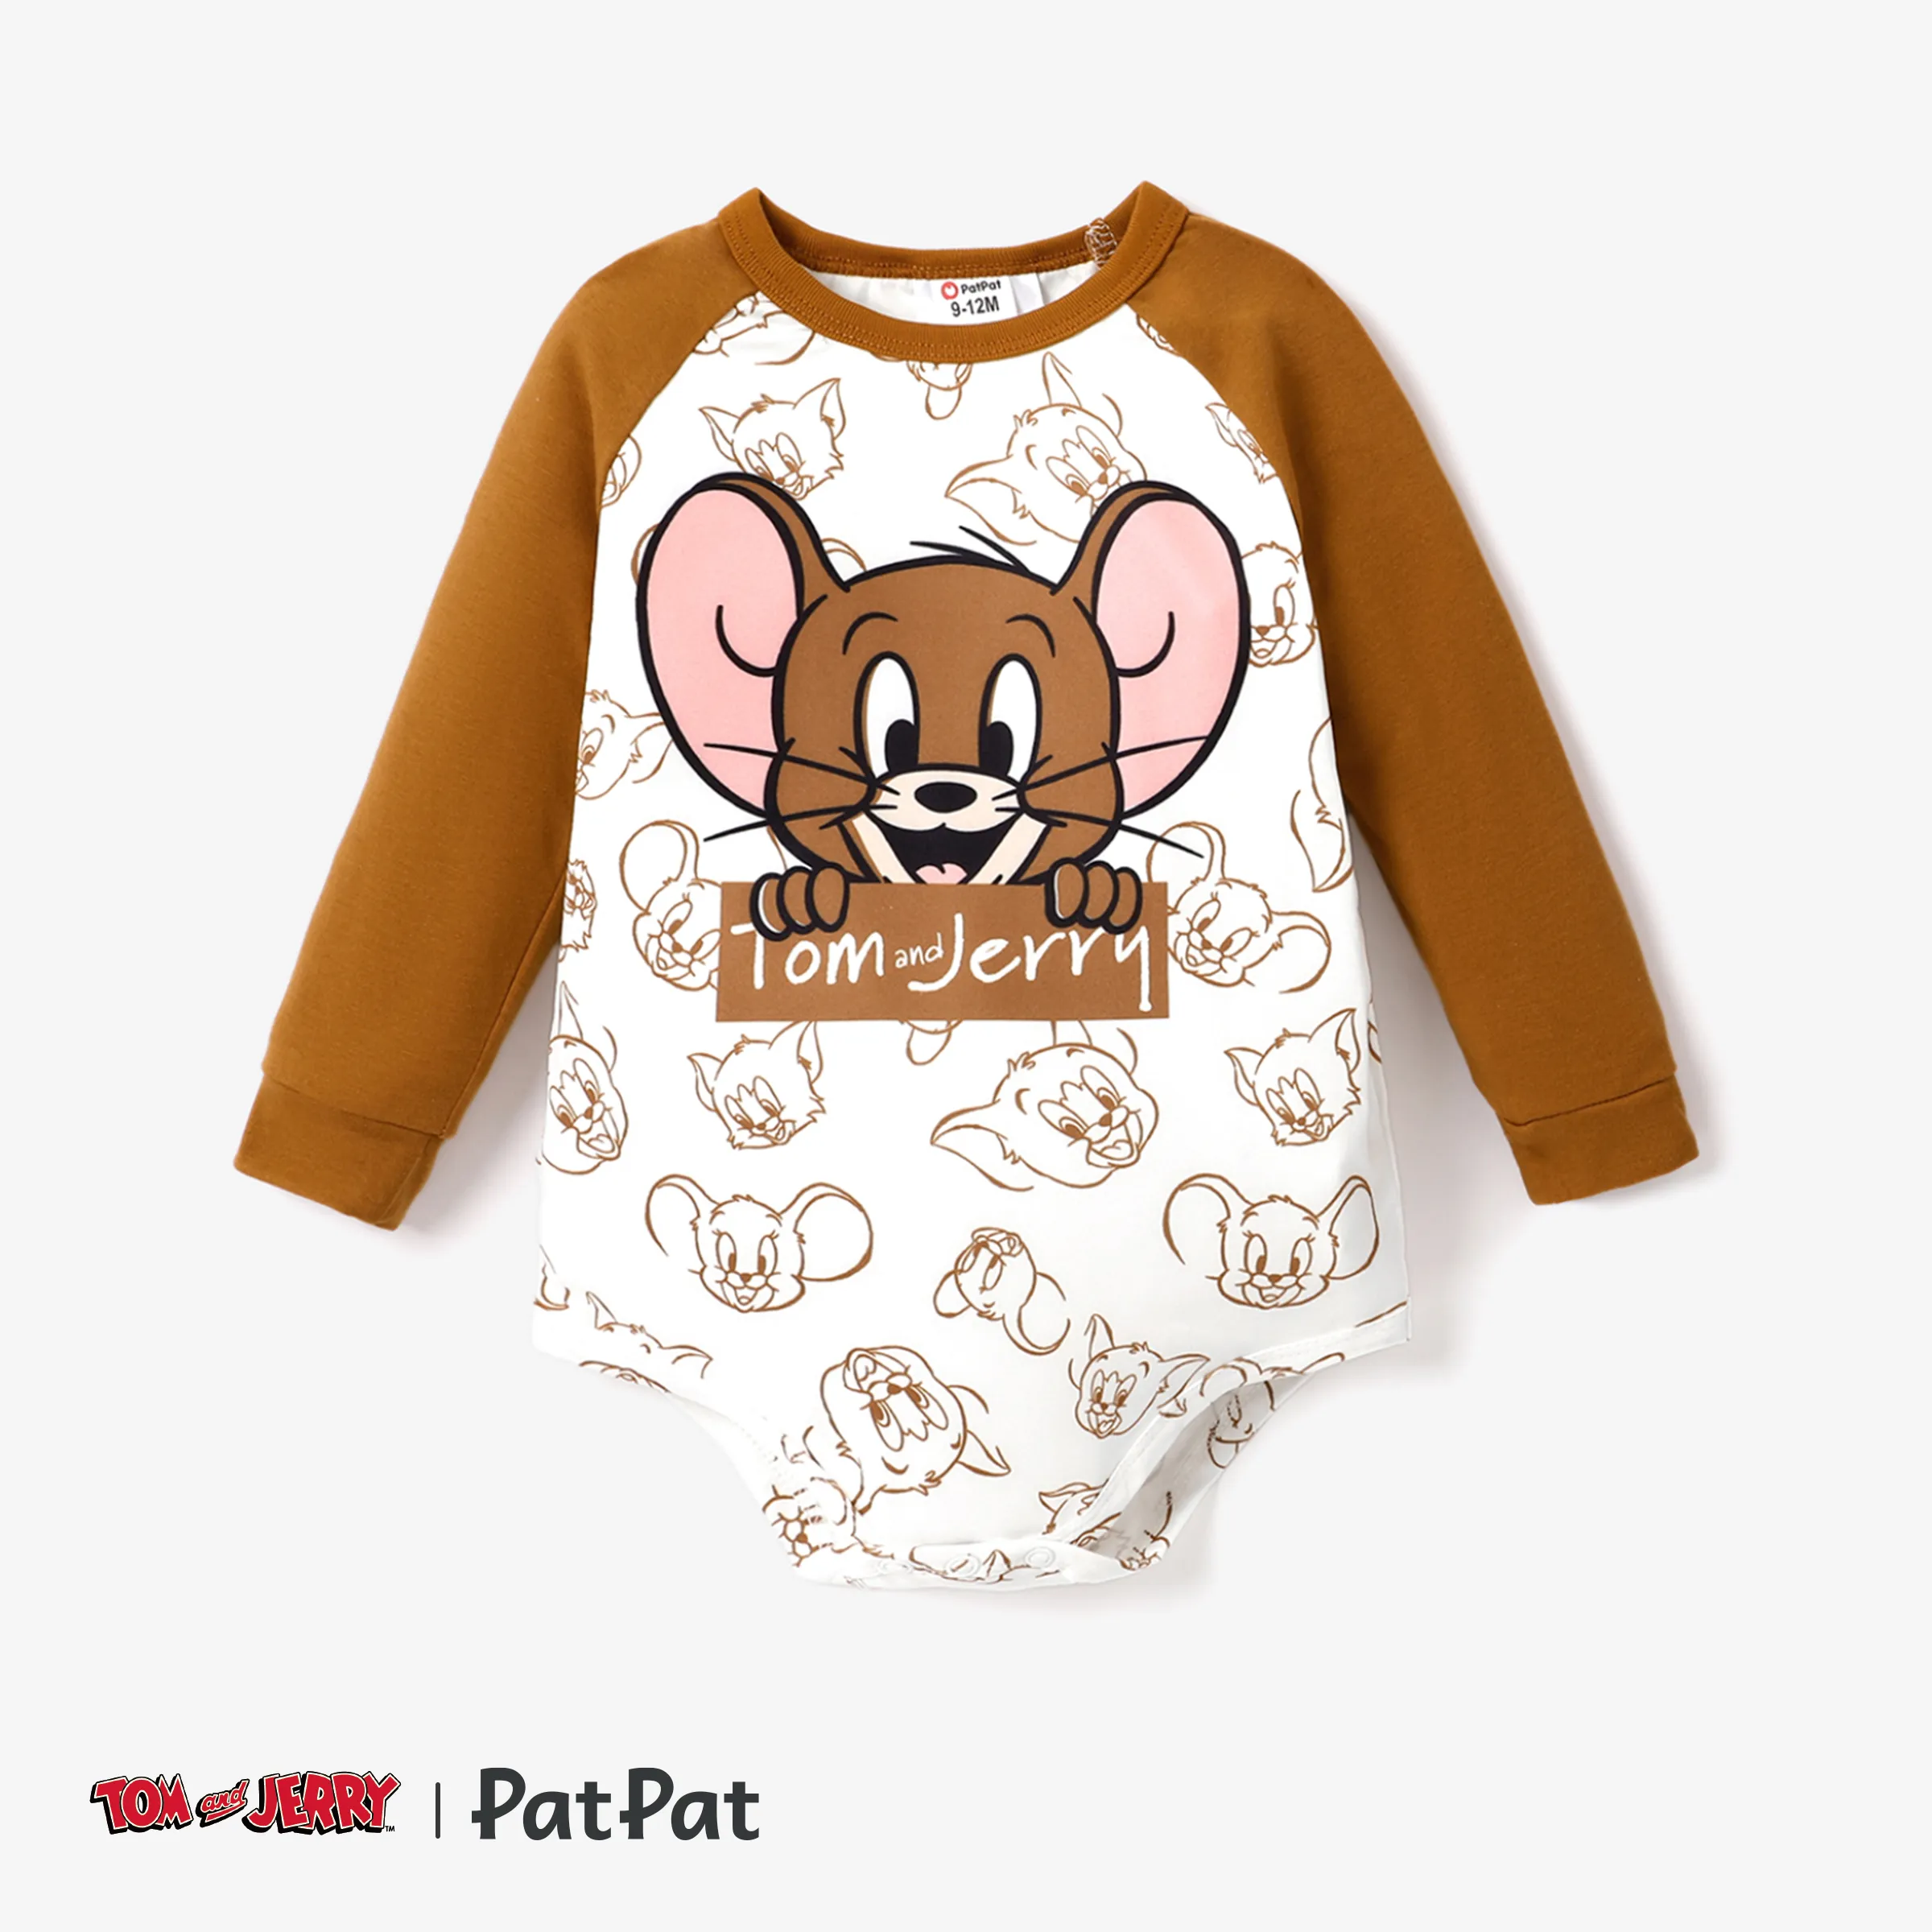 Tom And Jerry Baby Boy Character Graphic A Romper Or A Pair Of Pants To Wear With